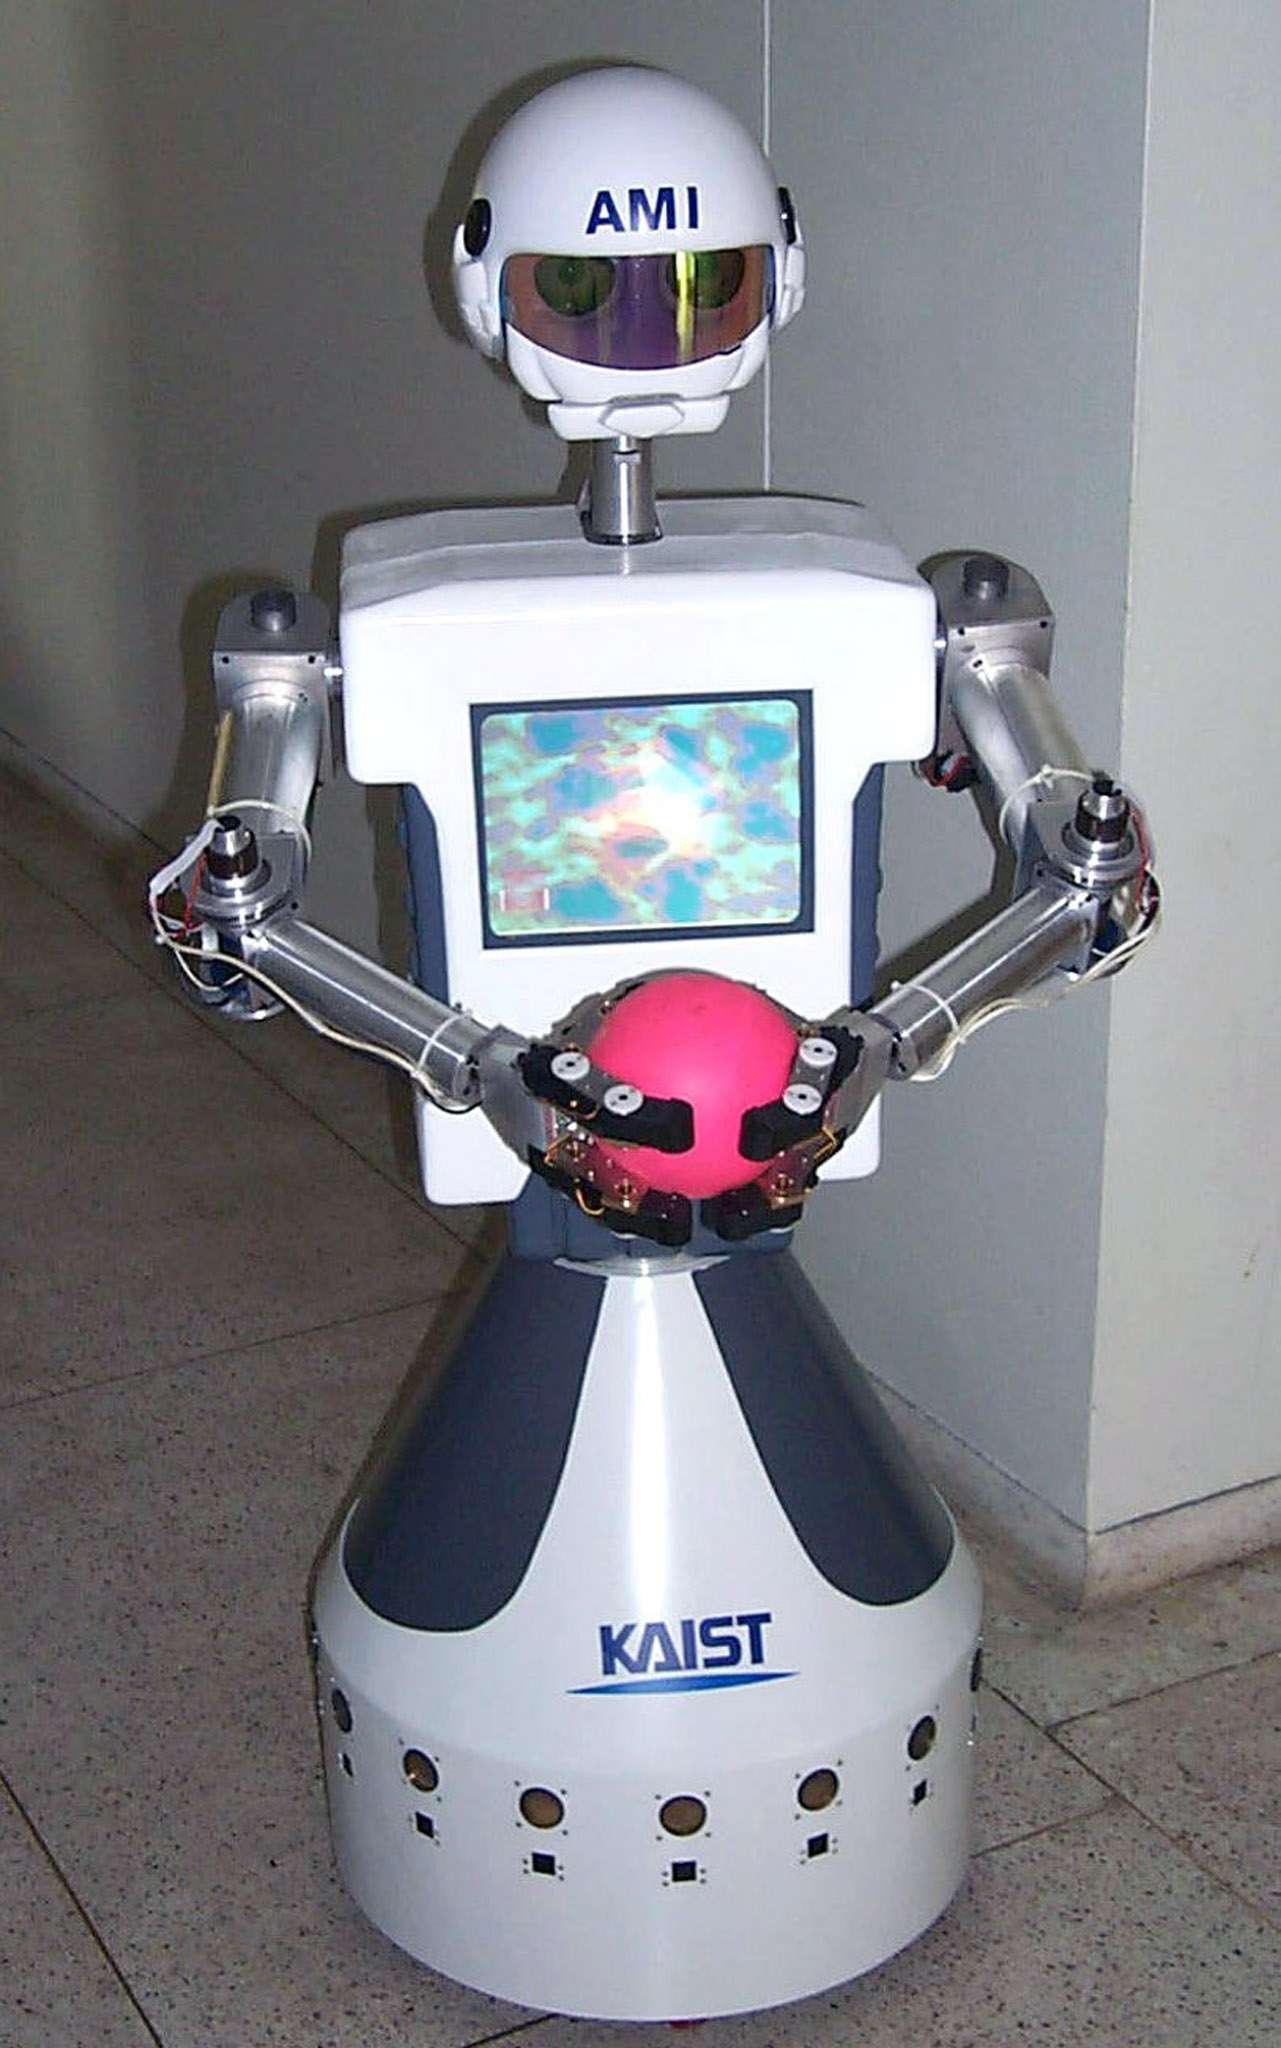 A robot named AMI (Artificial Intelligence Multimedia Innovative Human Robot), built by South Korean Yang Hyun-seung, a professor of electrical engineering and computer science at the Korea Advanced Institute of Science and Technology Photo: Reuters, KAIST